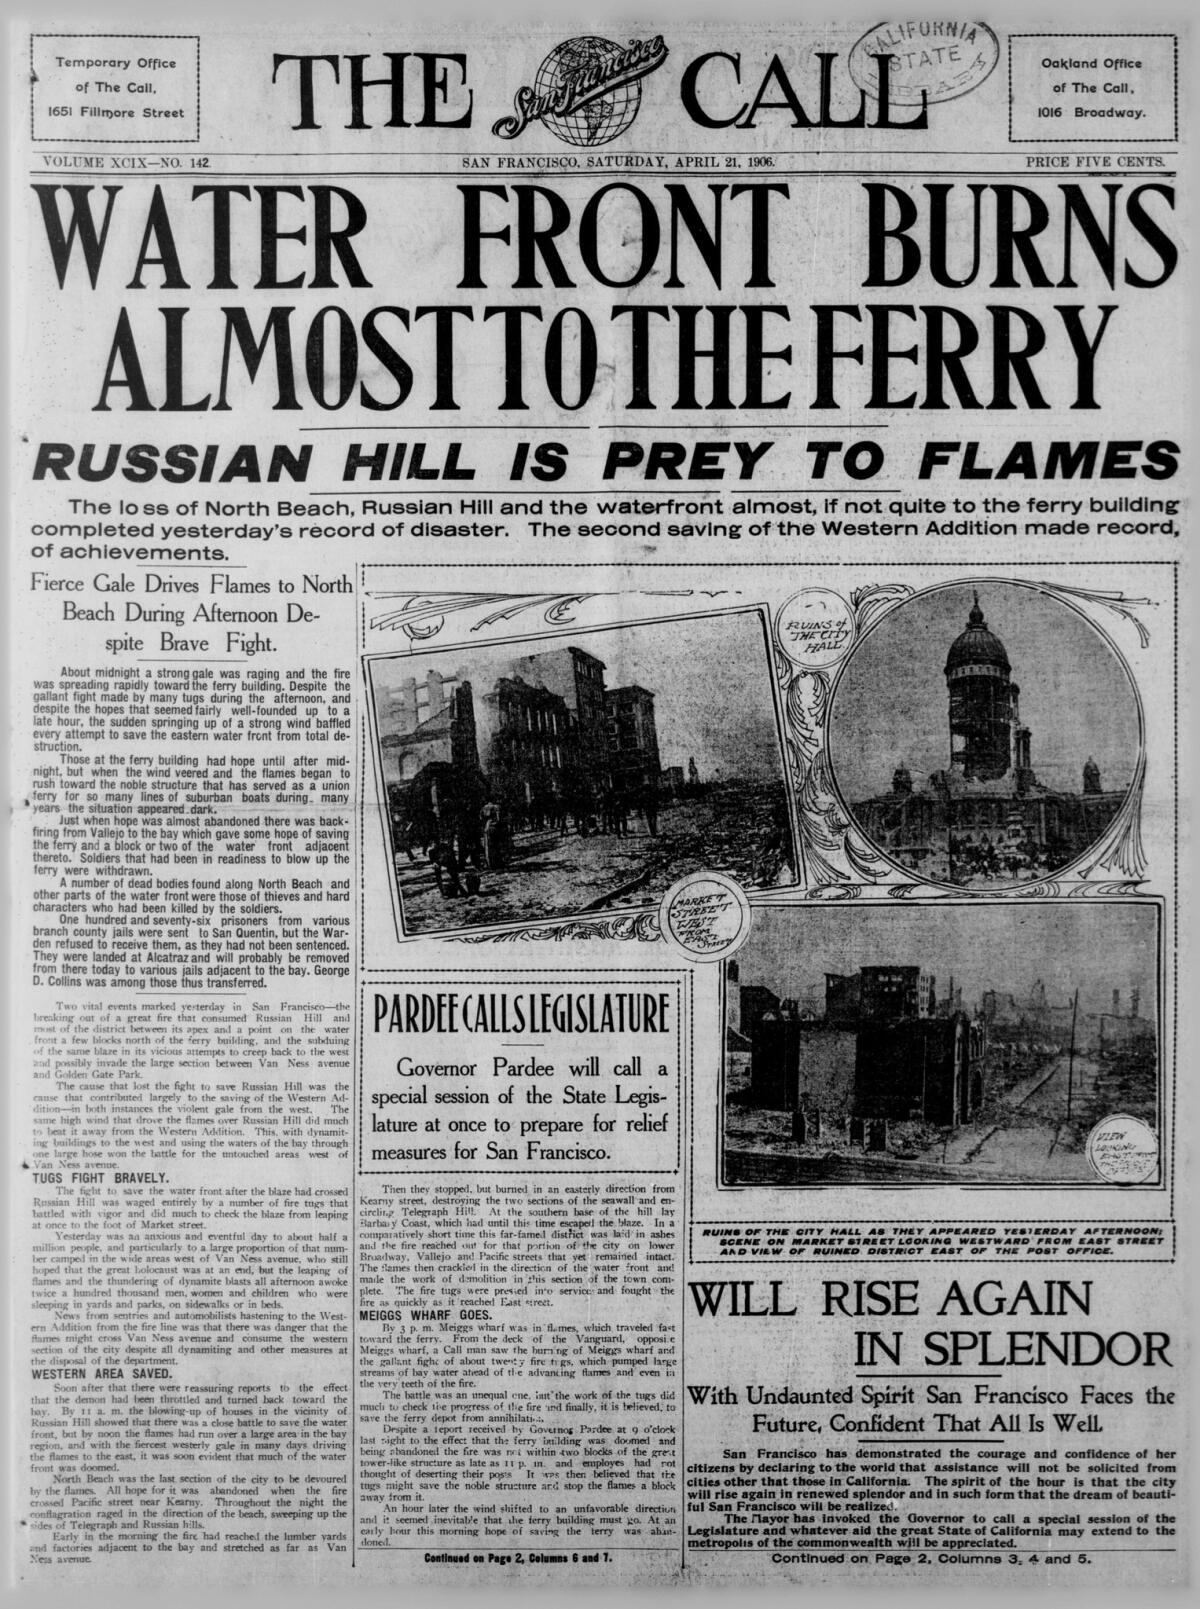 The San Francisco Call newspaper reports on how the flames from the great fire of 1906 headed toward the Ferry Building.